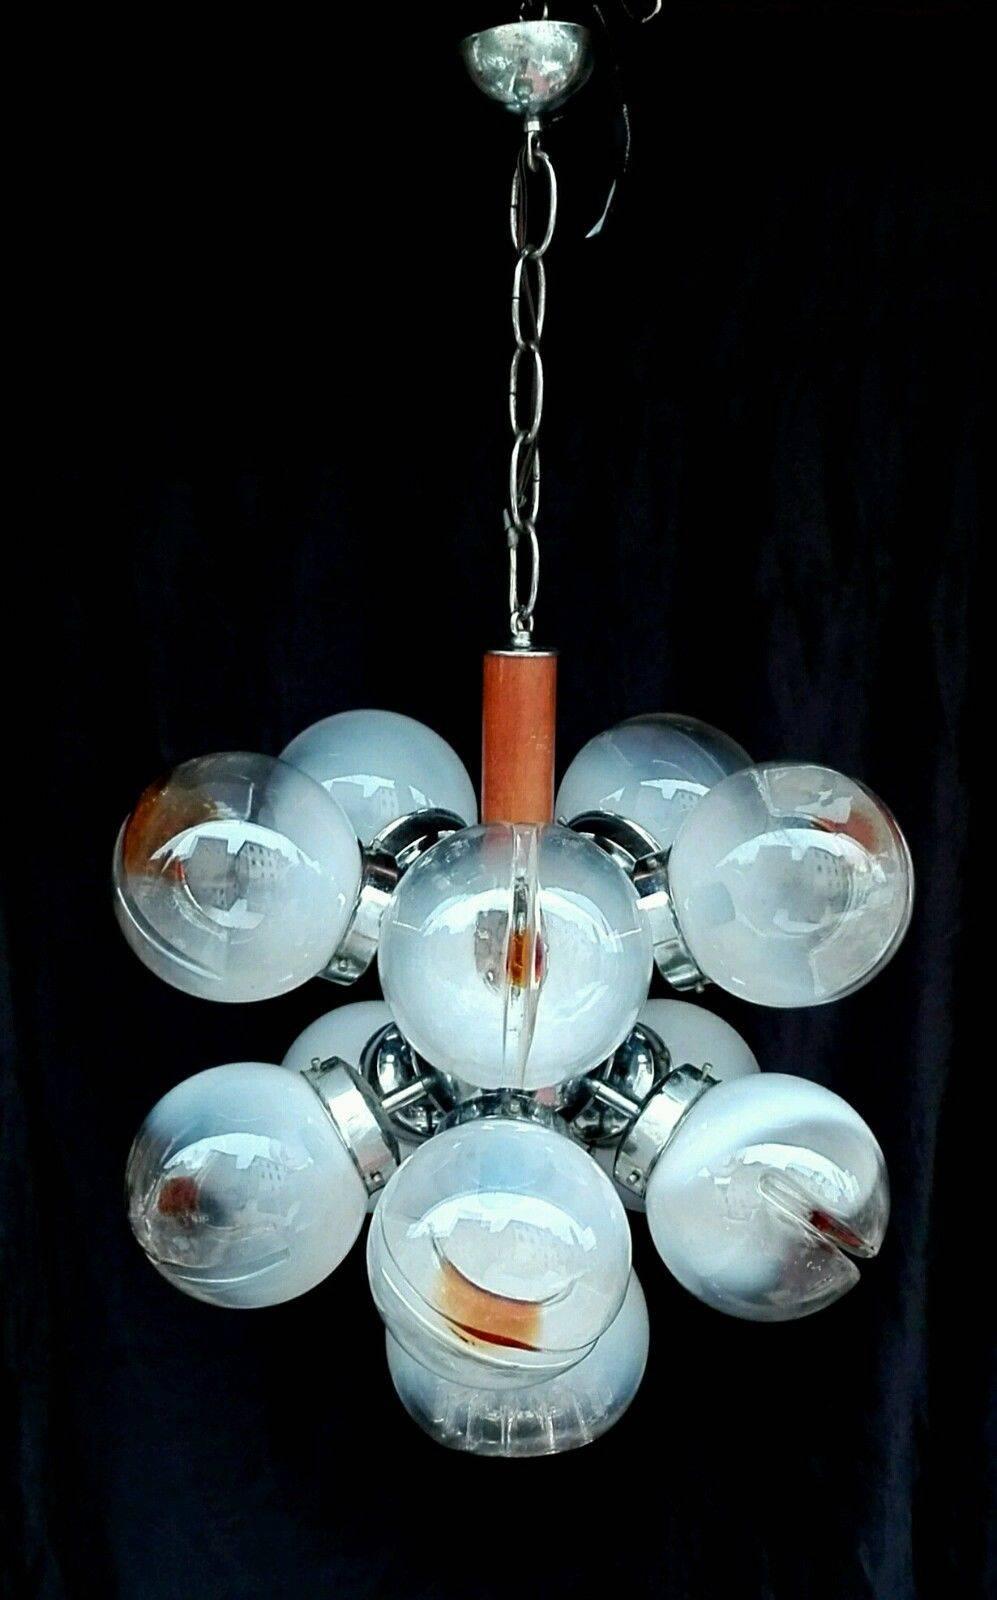 A stunning Sputnik style chandelier with 11 art glass globes in various designs. Made by Mazzega of Murano, Italy.

Height measurement does not include the chain.

A few general notes about all items available through 1stdibs dealer MOBLER  Home